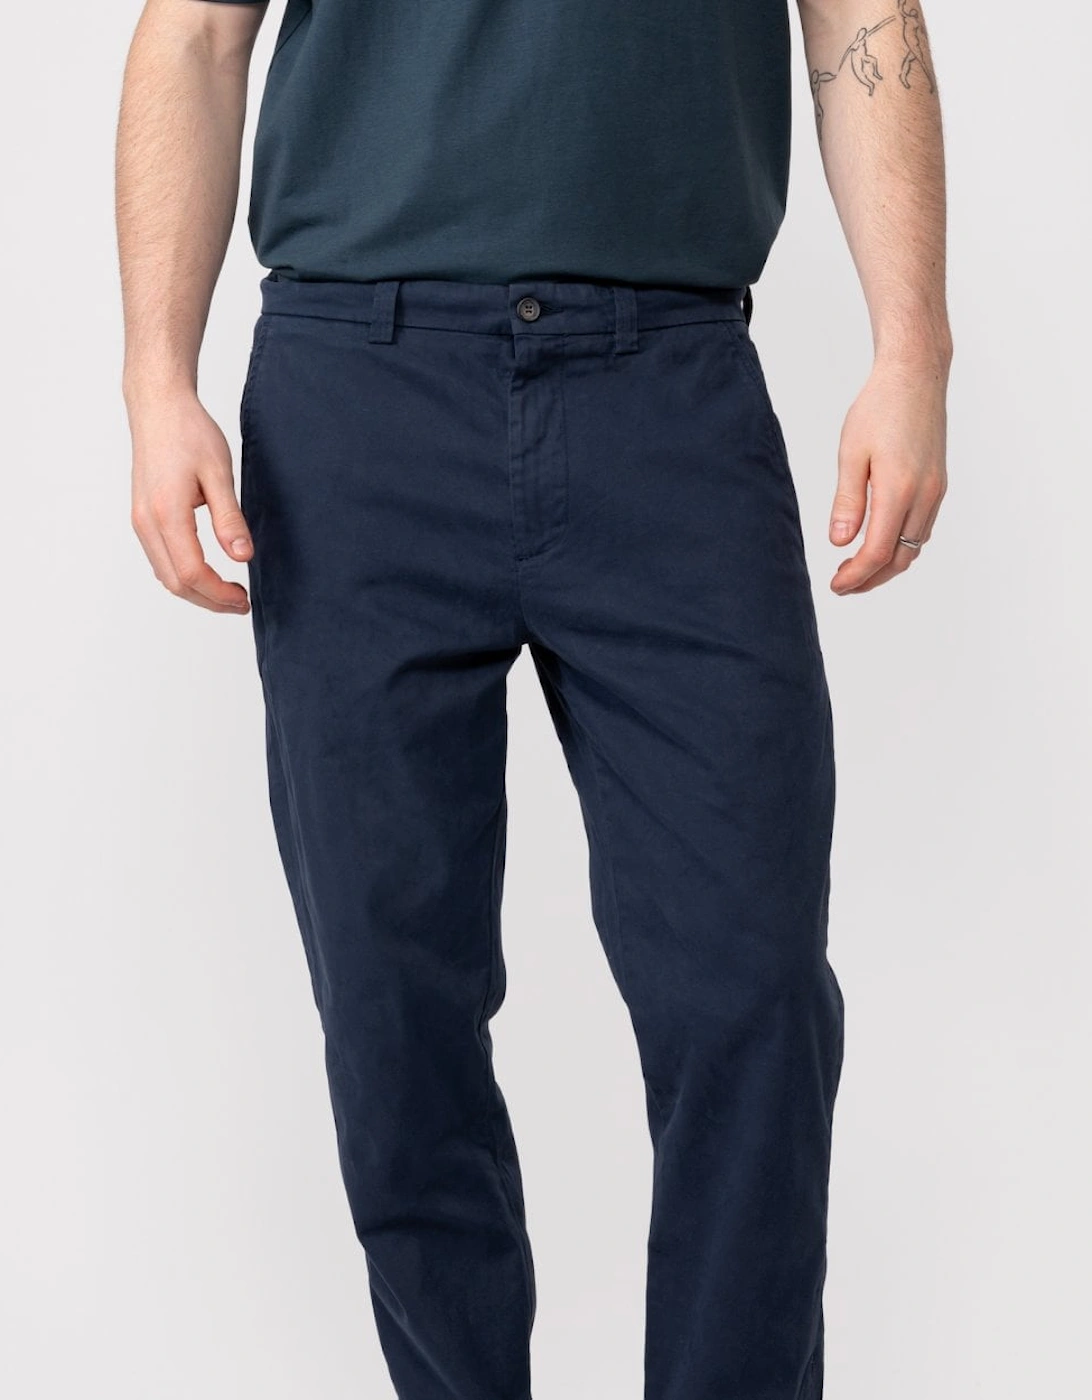 Besterios Mens Garment Dyed Cotton Chino